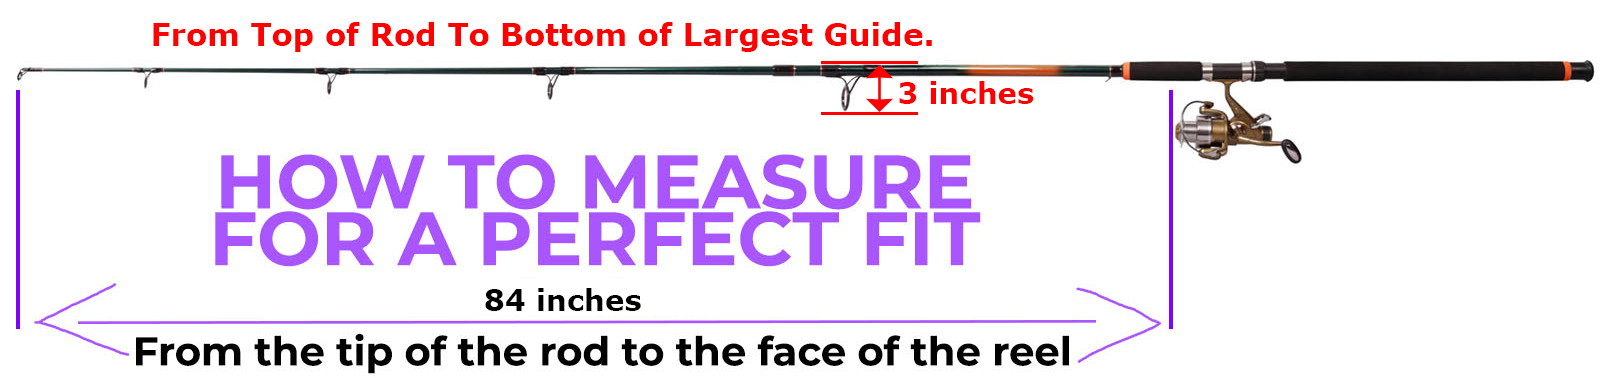 How to measure saltwater fishing rods